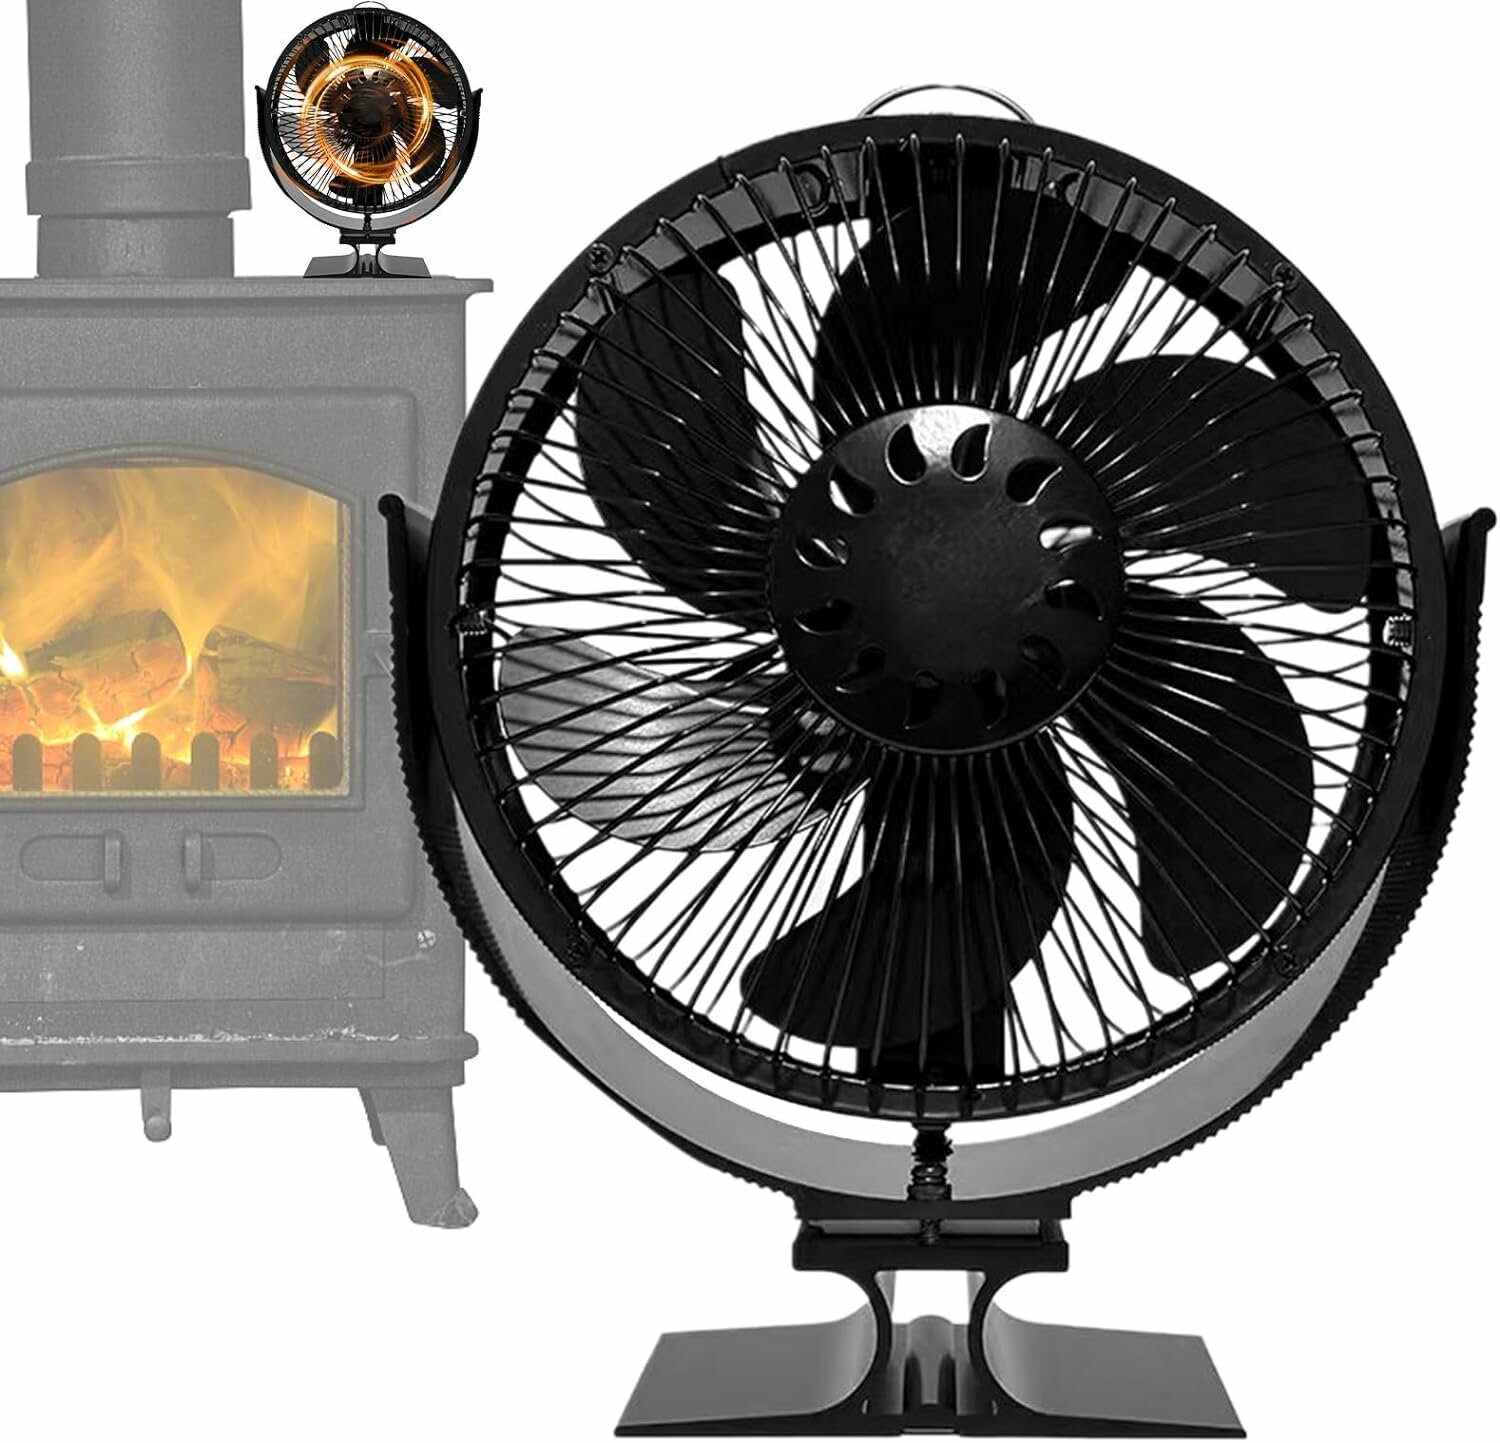 6 Blades Heat Powered 360 ° Rotation Stove Fan with Cover Fireplace Heat Powered Eco-Friendly Fan Portable Heater Efficient Heat